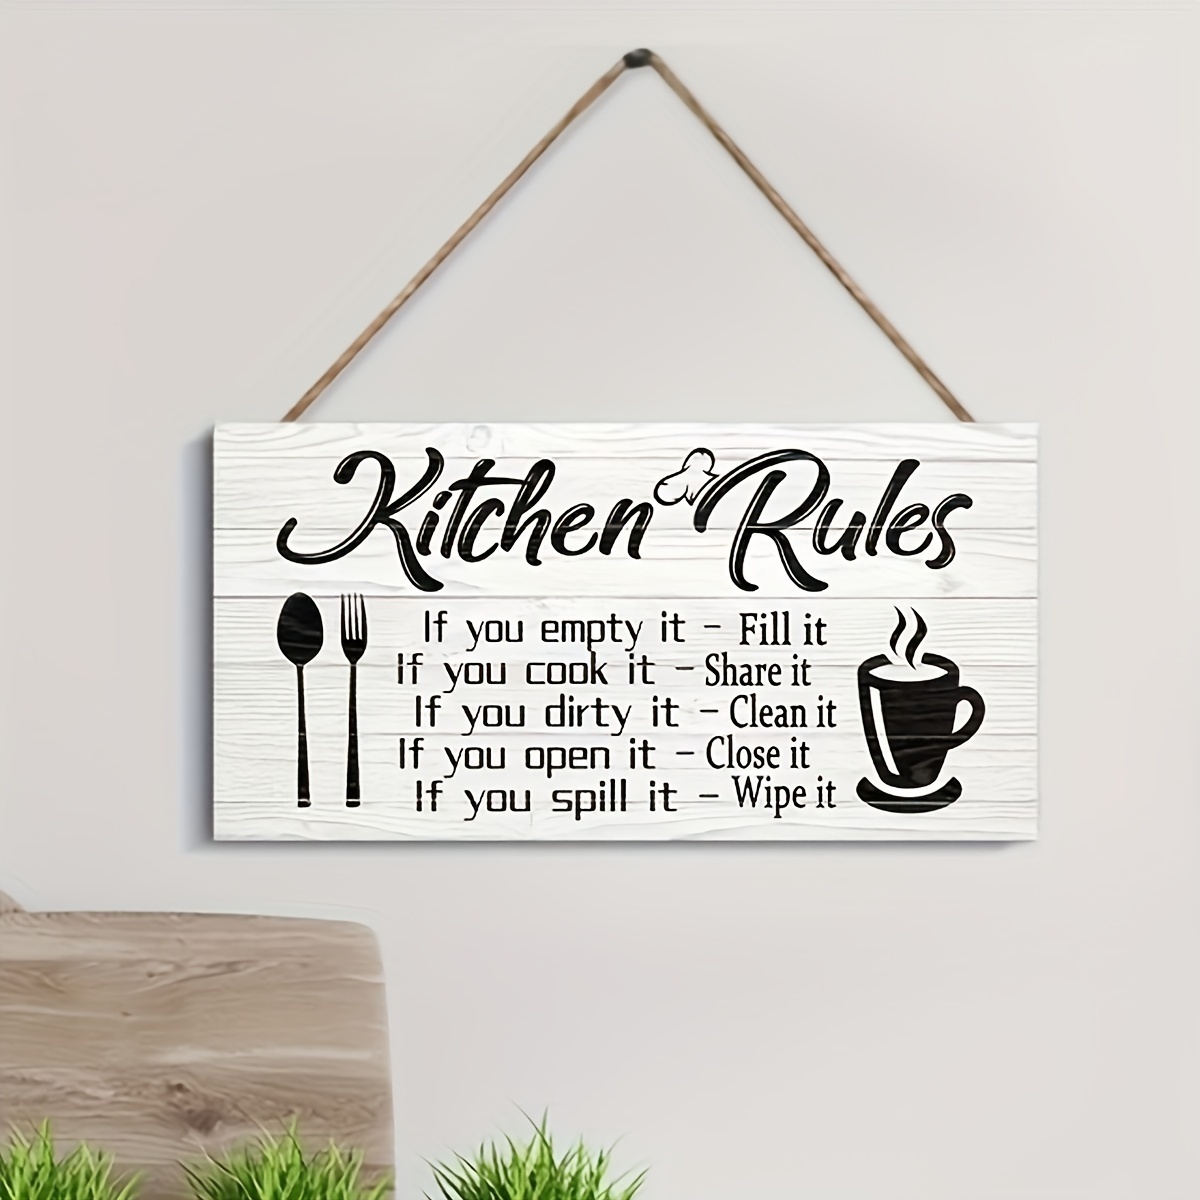 4 PCS Unframed Print, Kitchen Wall Decor, Funny Kitchen Wall Art, Humor  Quote for Kitchen Decor, My Kitchen My Rule, Home Deocr